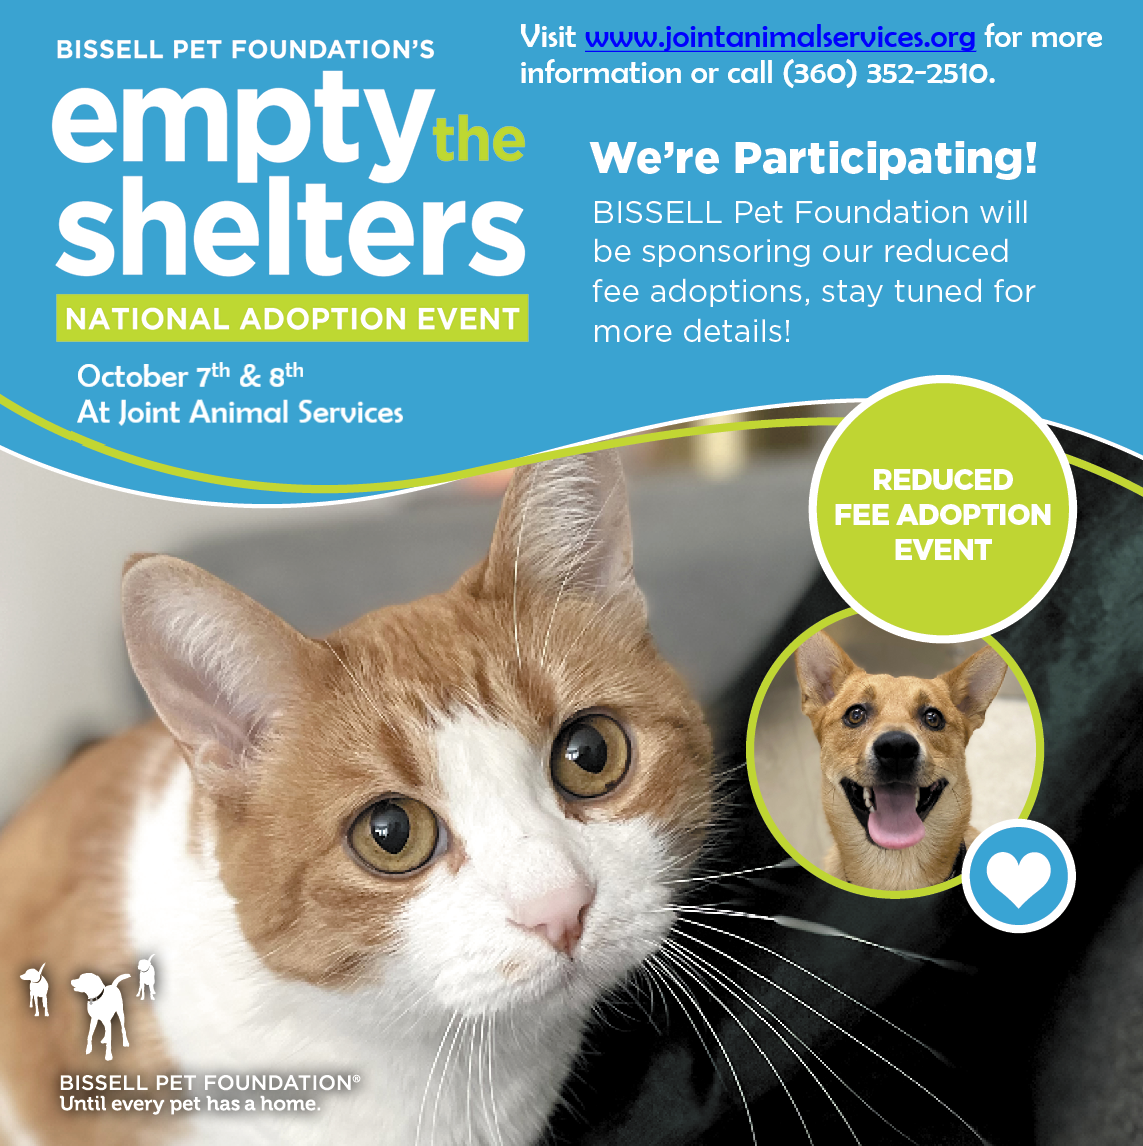 Bissell Pet Foundation Empty the Shelter Event - Joint Animal Services